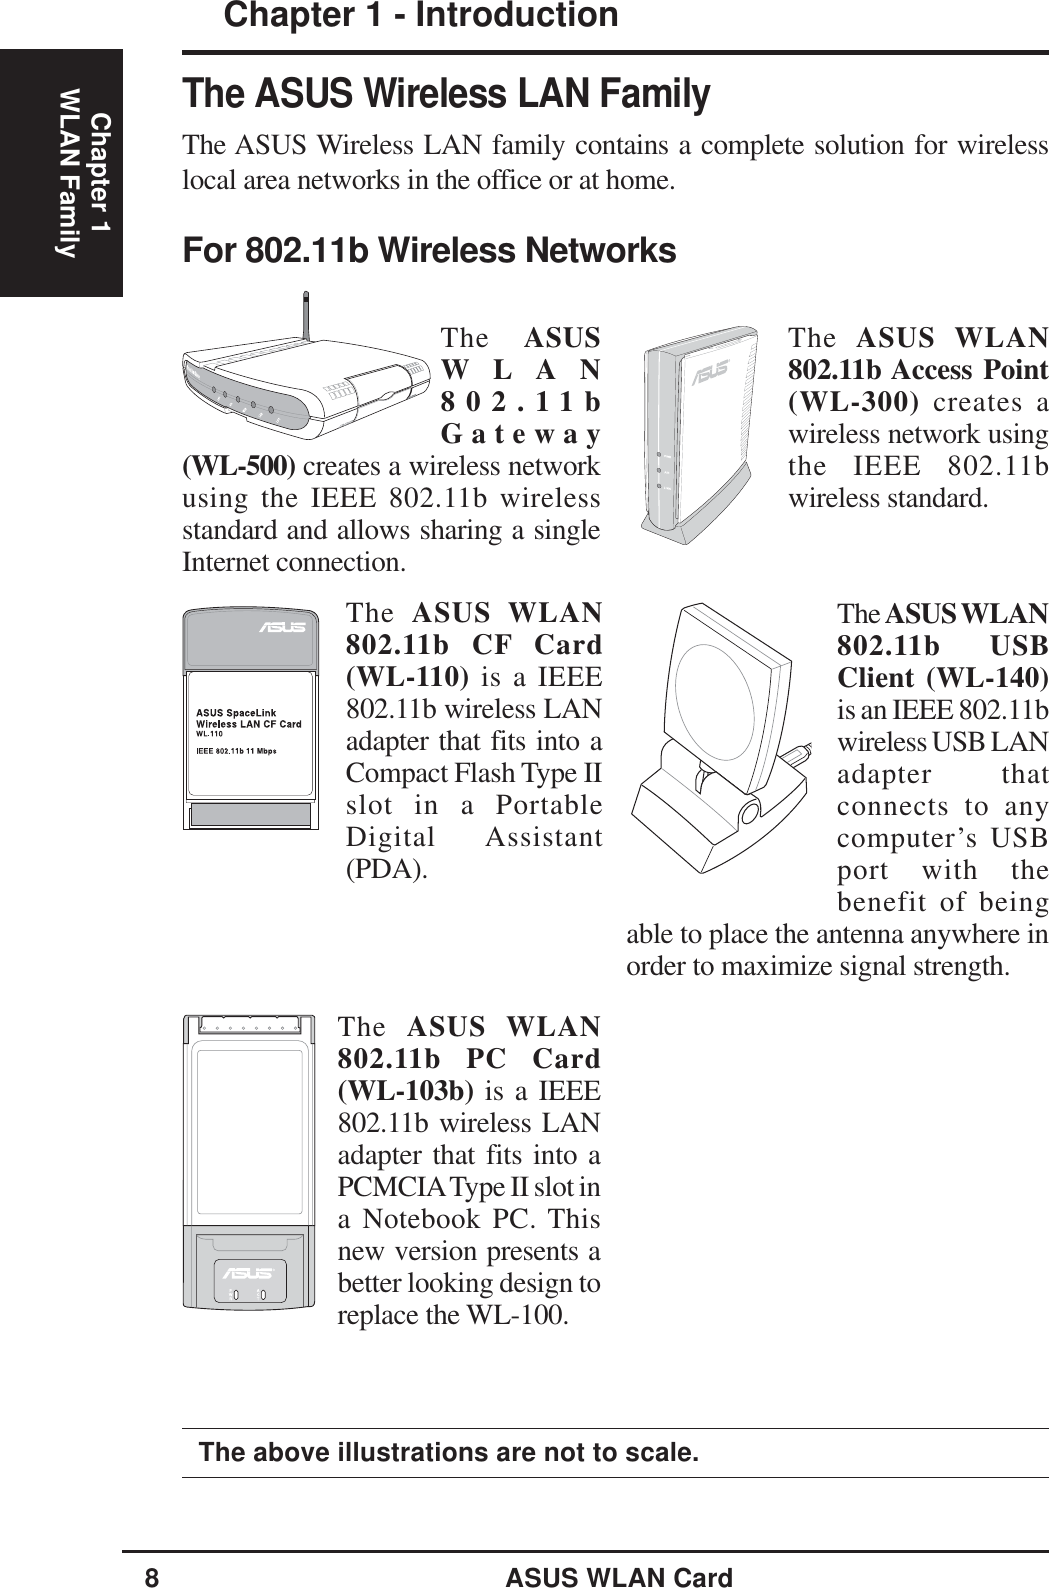 8ASUS WLAN CardChapter 1 - IntroductionChapter 1WLAN FamilyThe ASUS Wireless LAN FamilyThe ASUS Wireless LAN family contains a complete solution for wirelesslocal area networks in the office or at home.For 802.11b Wireless NetworksThe above illustrations are not to scale.The ASUS WLAN802.11b USBClient (WL-140)is an IEEE 802.11bwireless USB LANadapter thatconnects to anycomputer’s USBport with thebenefit of beingable to place the antenna anywhere inorder to maximize signal strength.The  ASUS WLAN802.11b CF Card(WL-110) is a IEEE802.11b wireless LANadapter that fits into aCompact Flash Type IIslot in a PortableDigital Assistant(PDA).The  ASUS WLAN802.11b Access Point(WL-300) creates awireless network usingthe IEEE 802.11bwireless standard.The  ASUSWLAN802.11bGateway(WL-500) creates a wireless networkusing the IEEE 802.11b wirelessstandard and allows sharing a singleInternet connection.The  ASUS WLAN802.11b PC Card(WL-103b) is a IEEE802.11b wireless LANadapter that fits into aPCMCIA Type II slot ina Notebook PC. Thisnew version presents abetter looking design toreplace the WL-100.